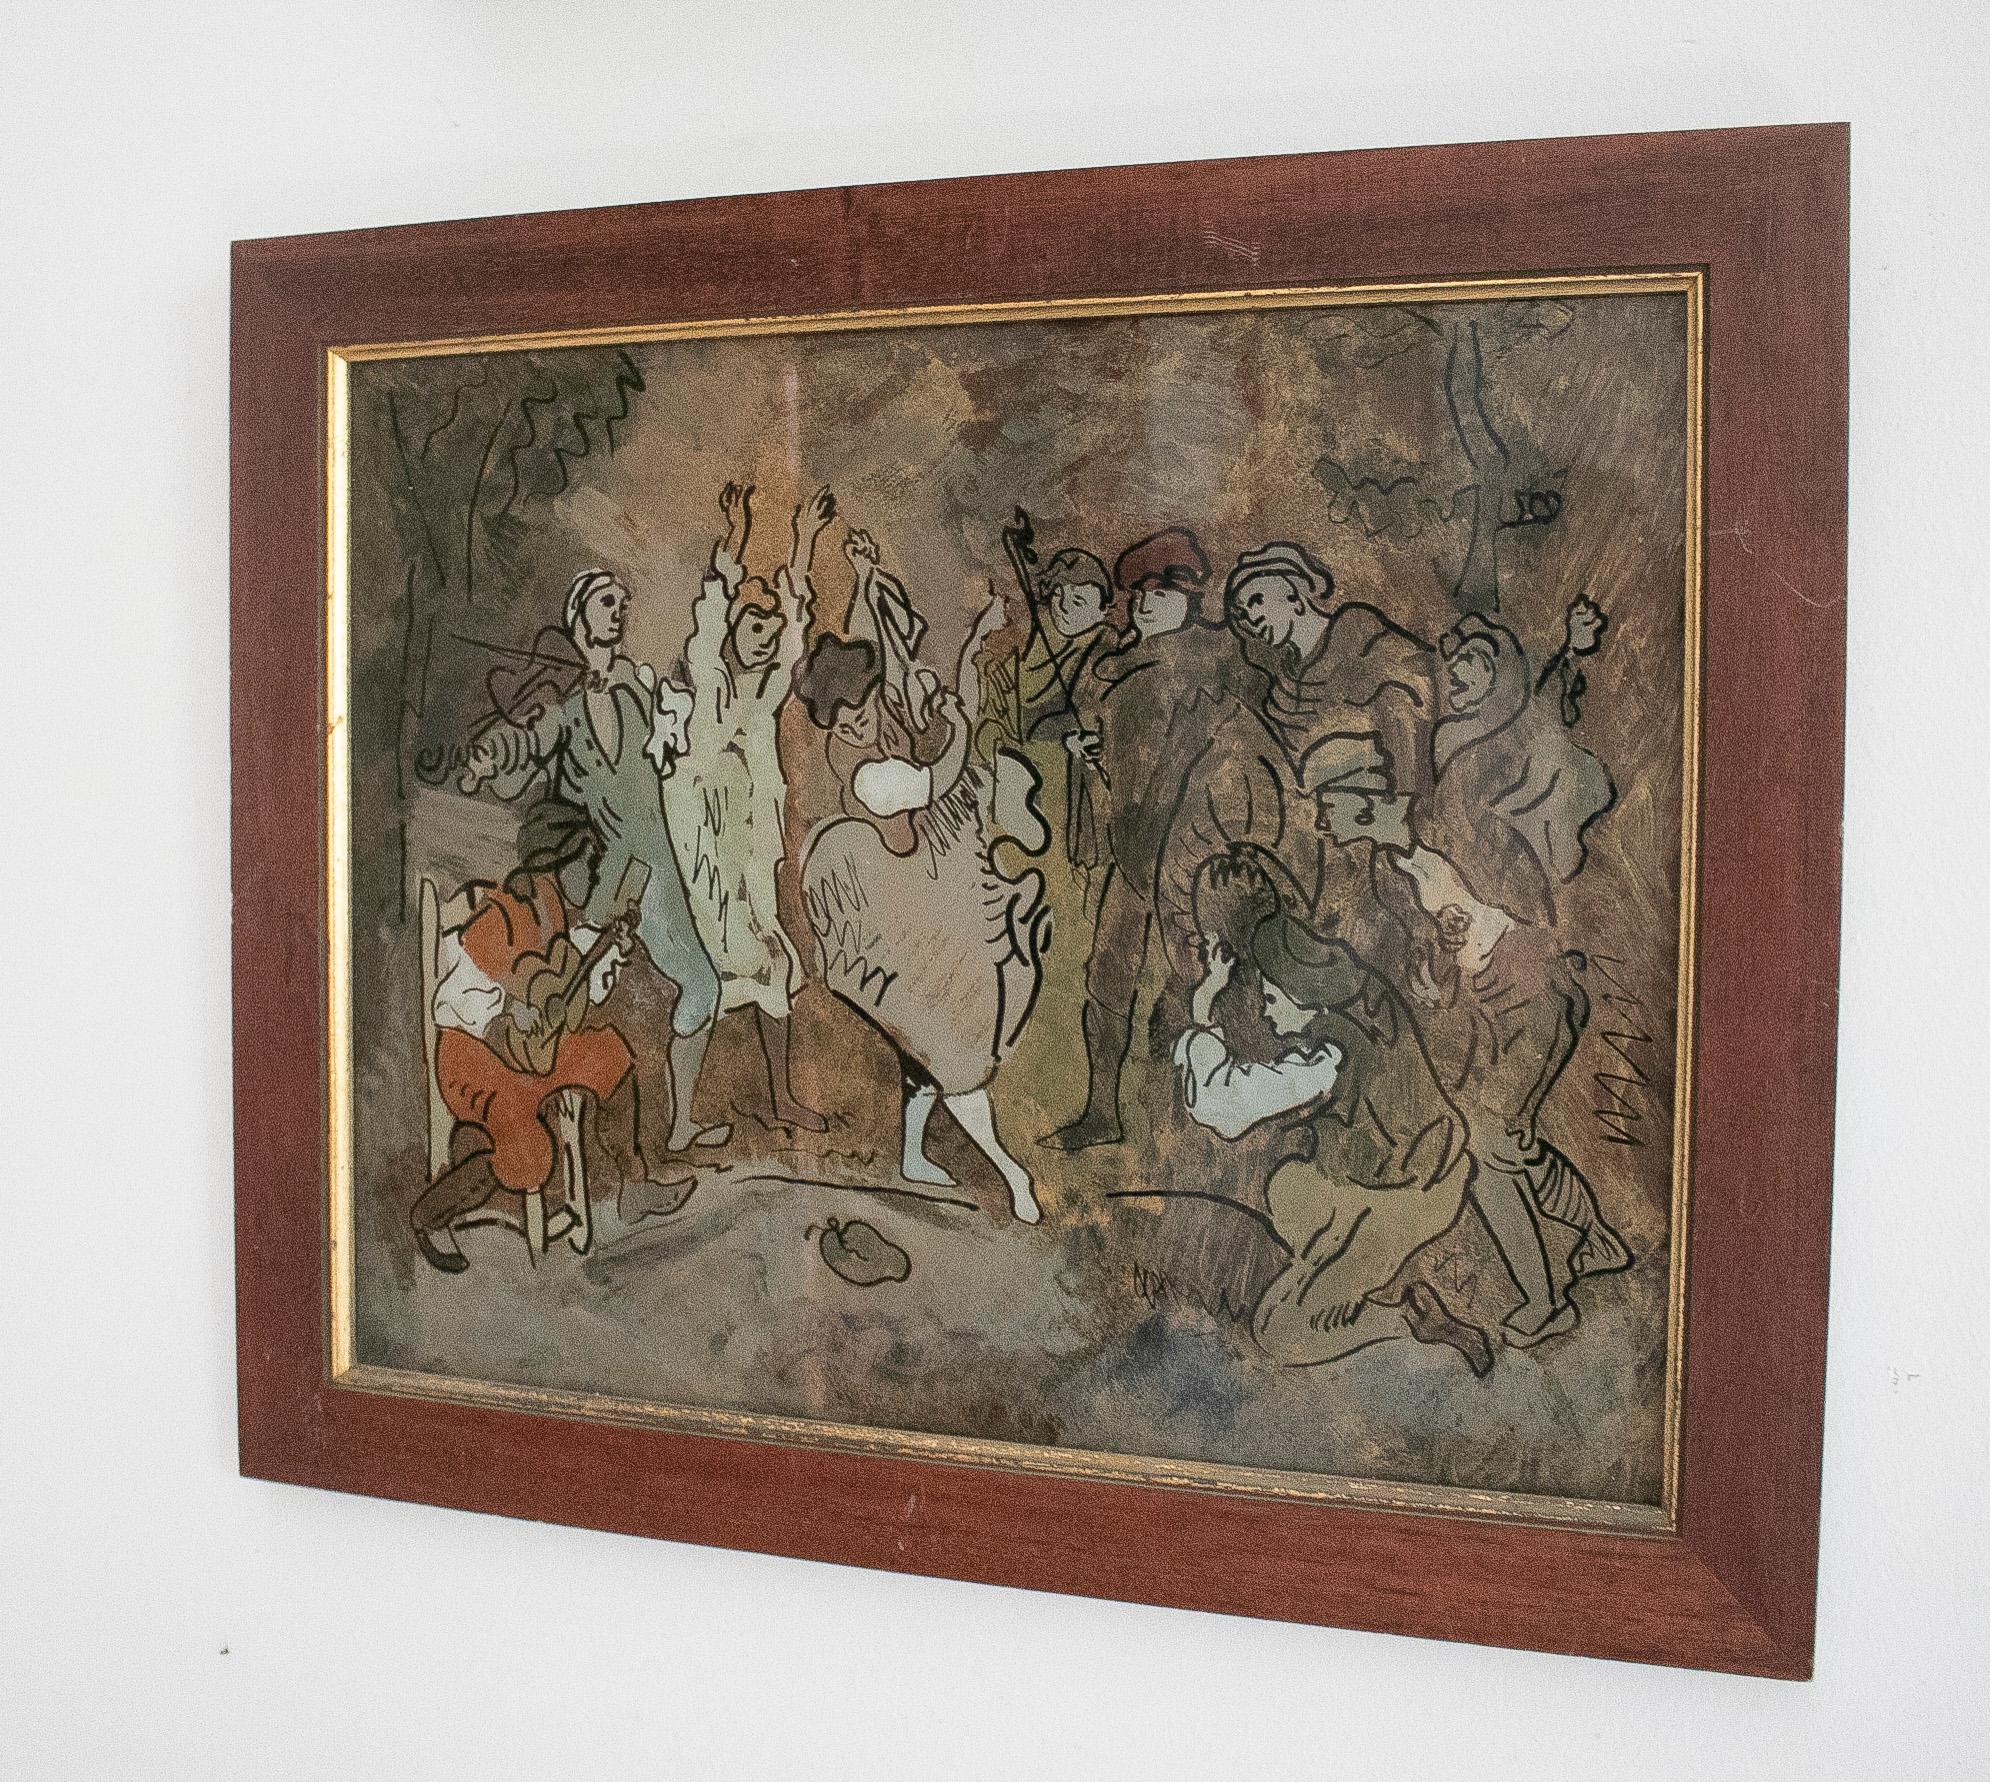 Vintage 1960s Spanish Andalusia flamenco fiesta people painting on glass

Measures with frame: 39x47x1.5cm.
 